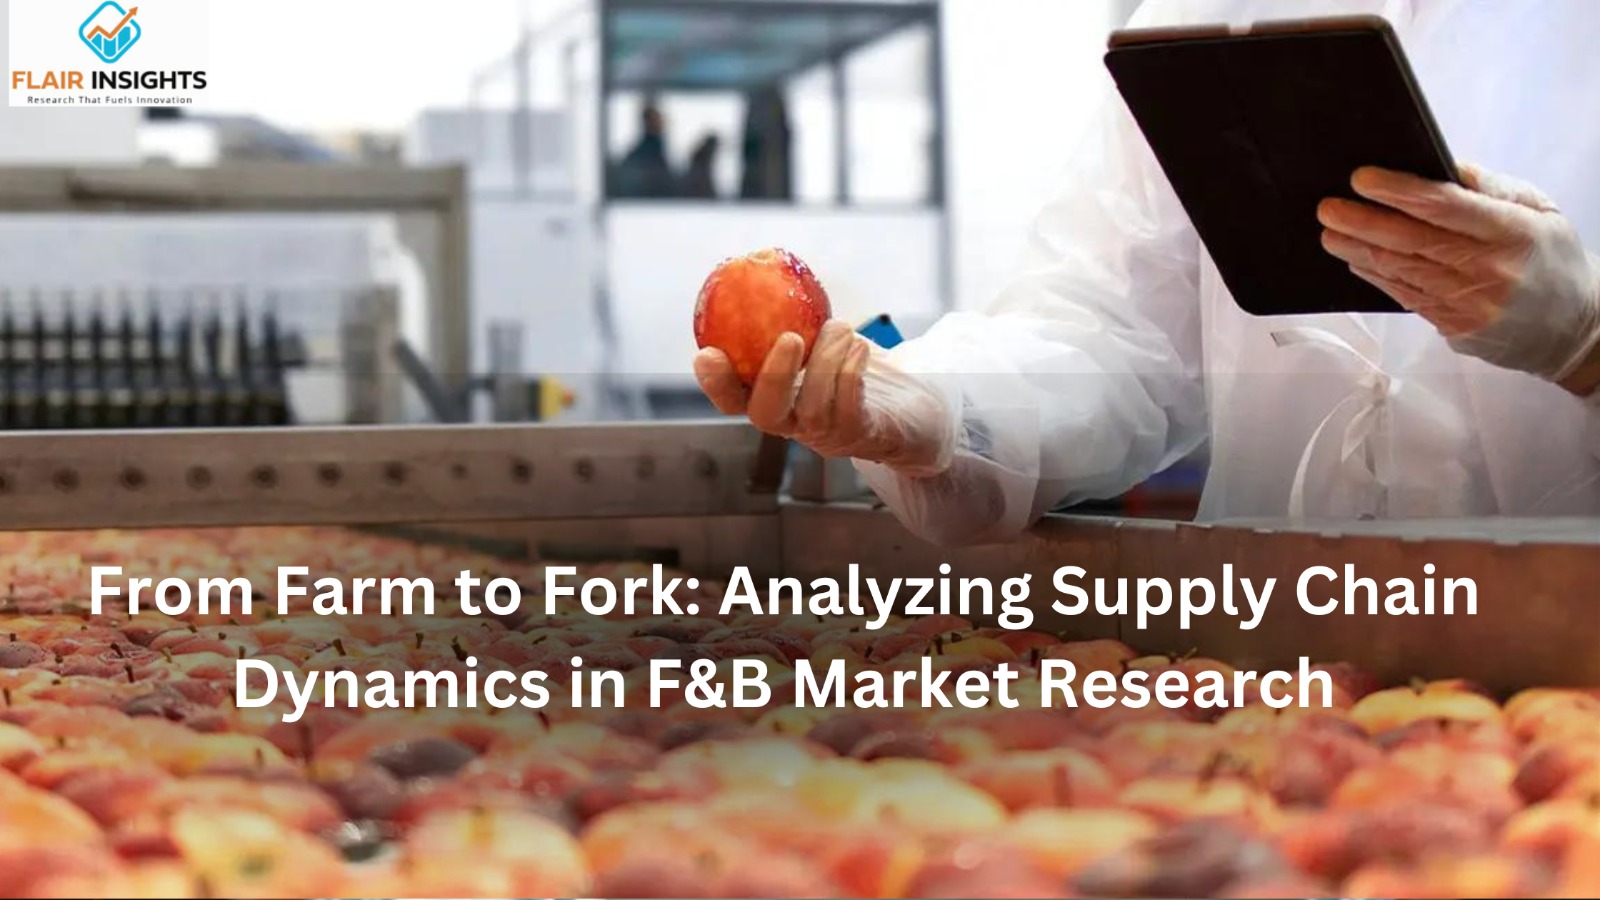 From Farm to Fork: Analyzing Supply Chain Dynamics in F&B Market Research